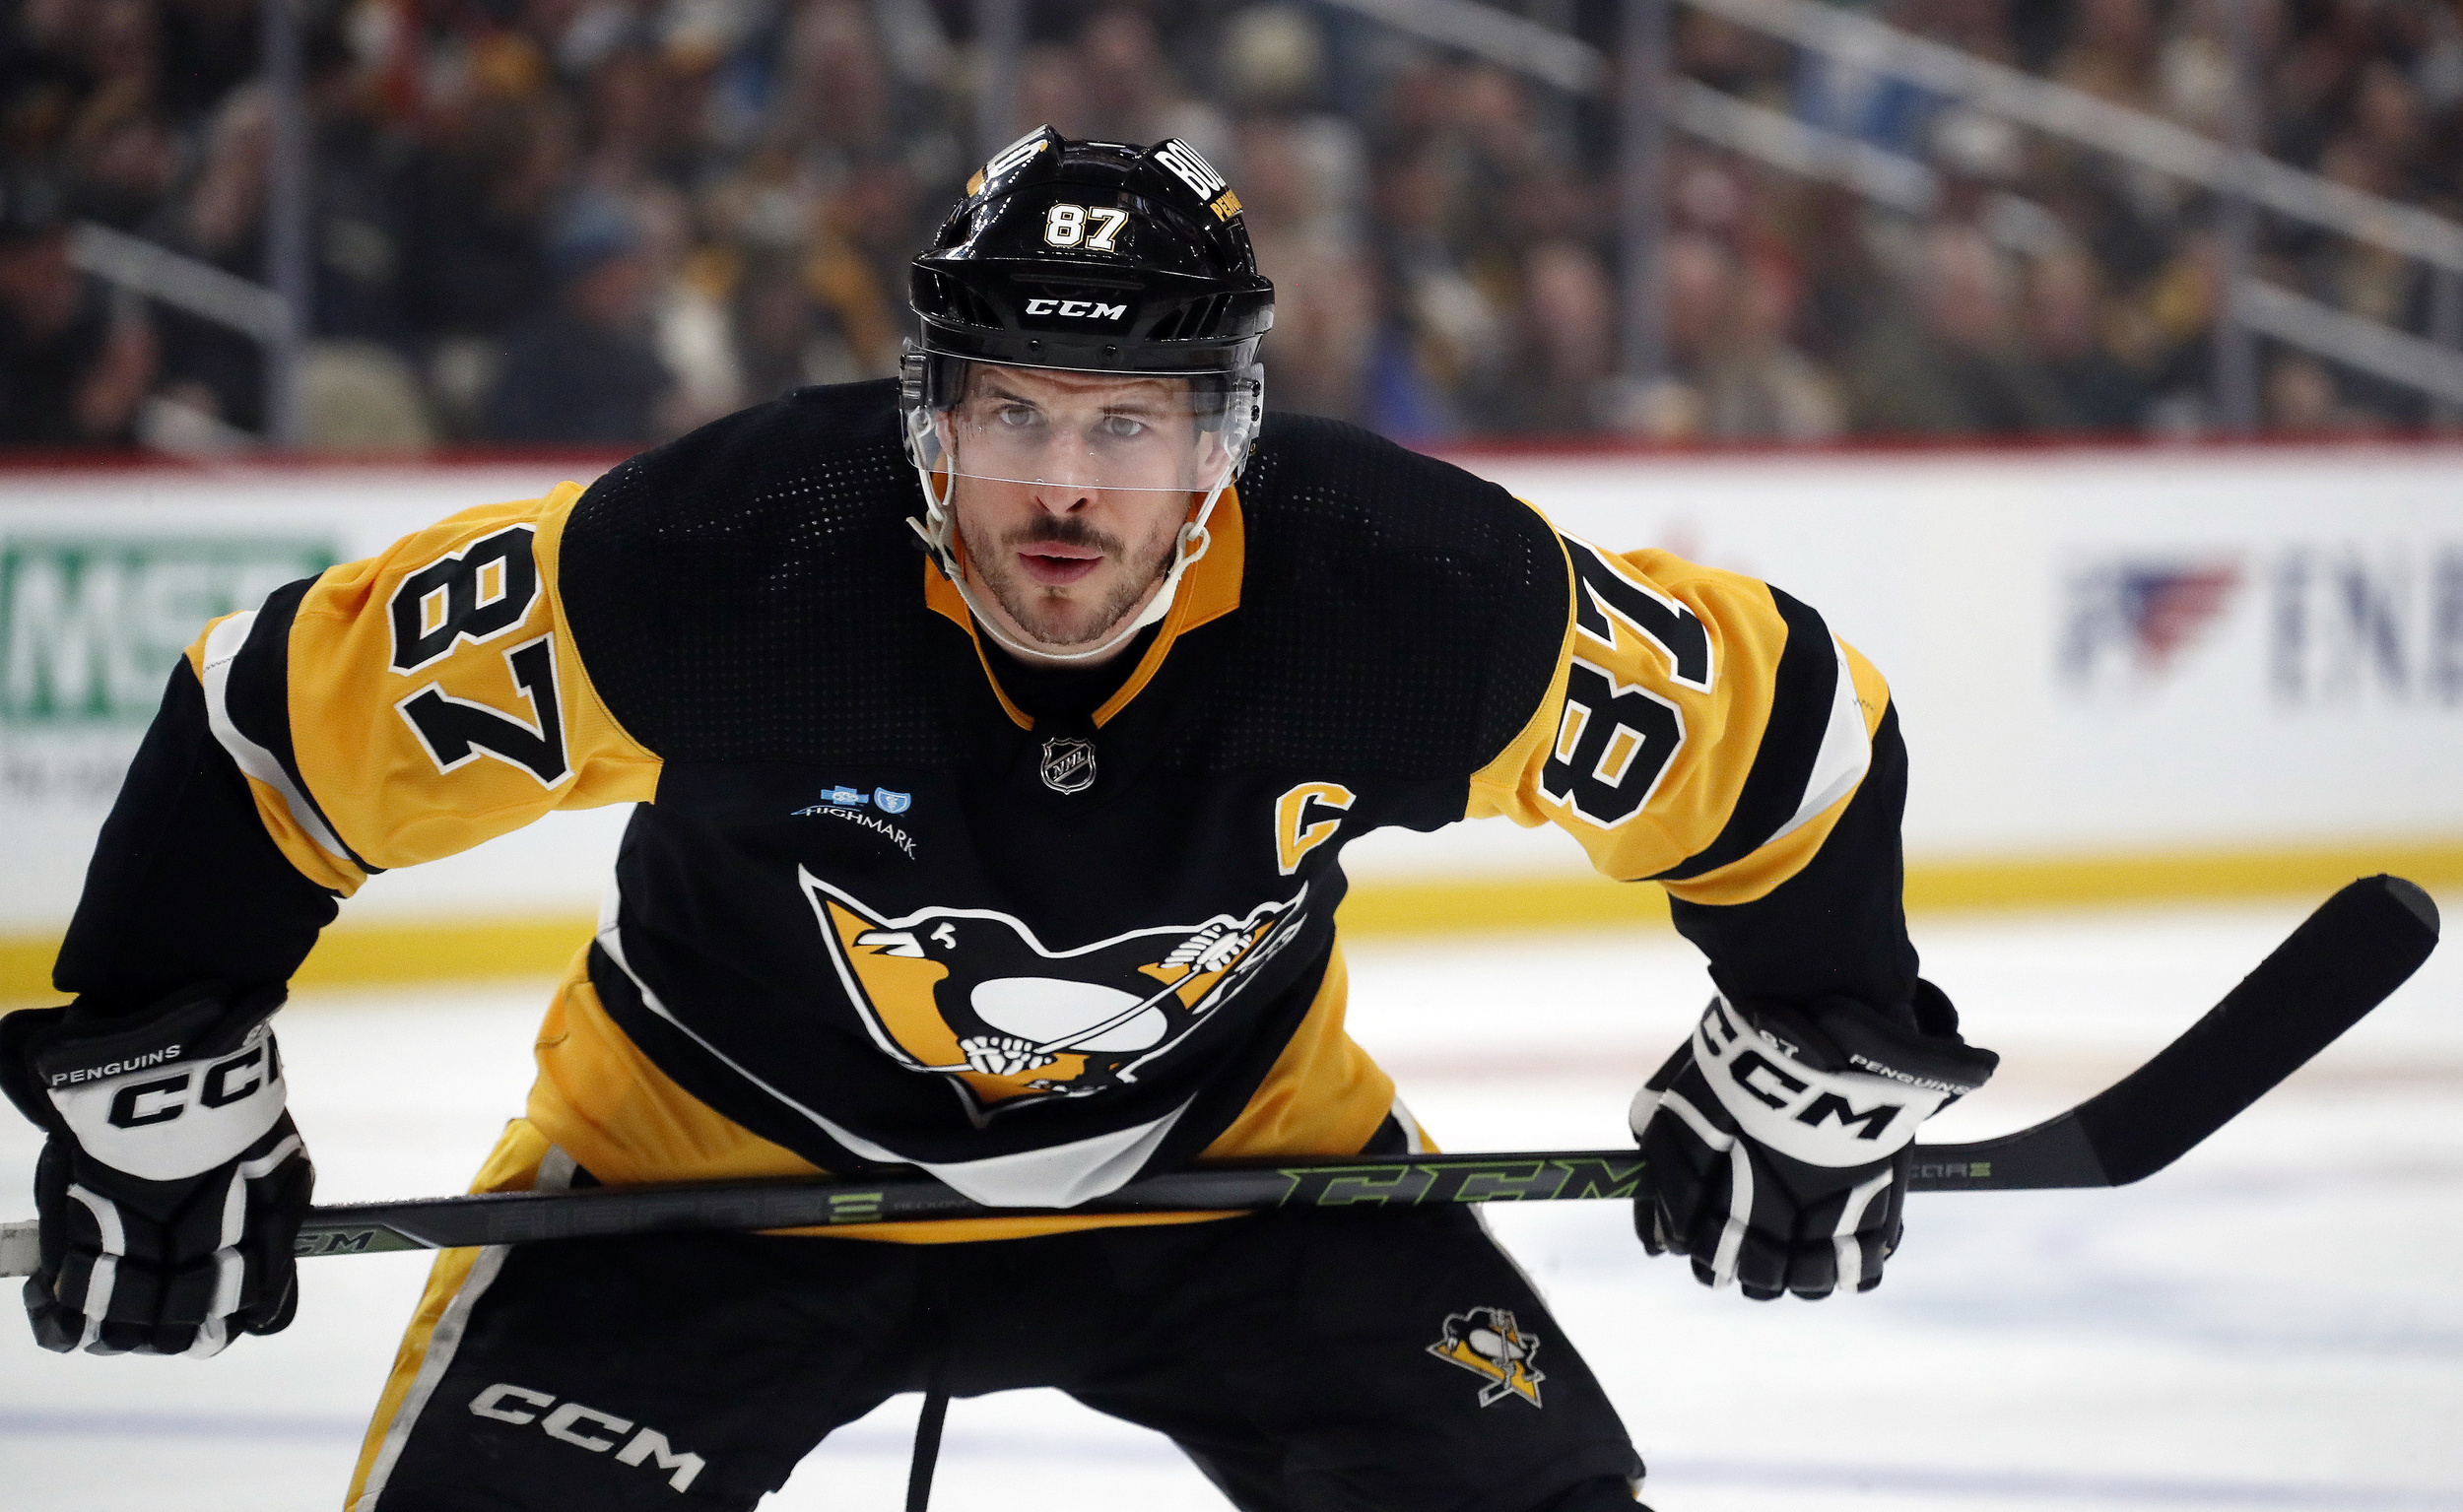 penguins, sidney crosby to discuss contract extension this summer